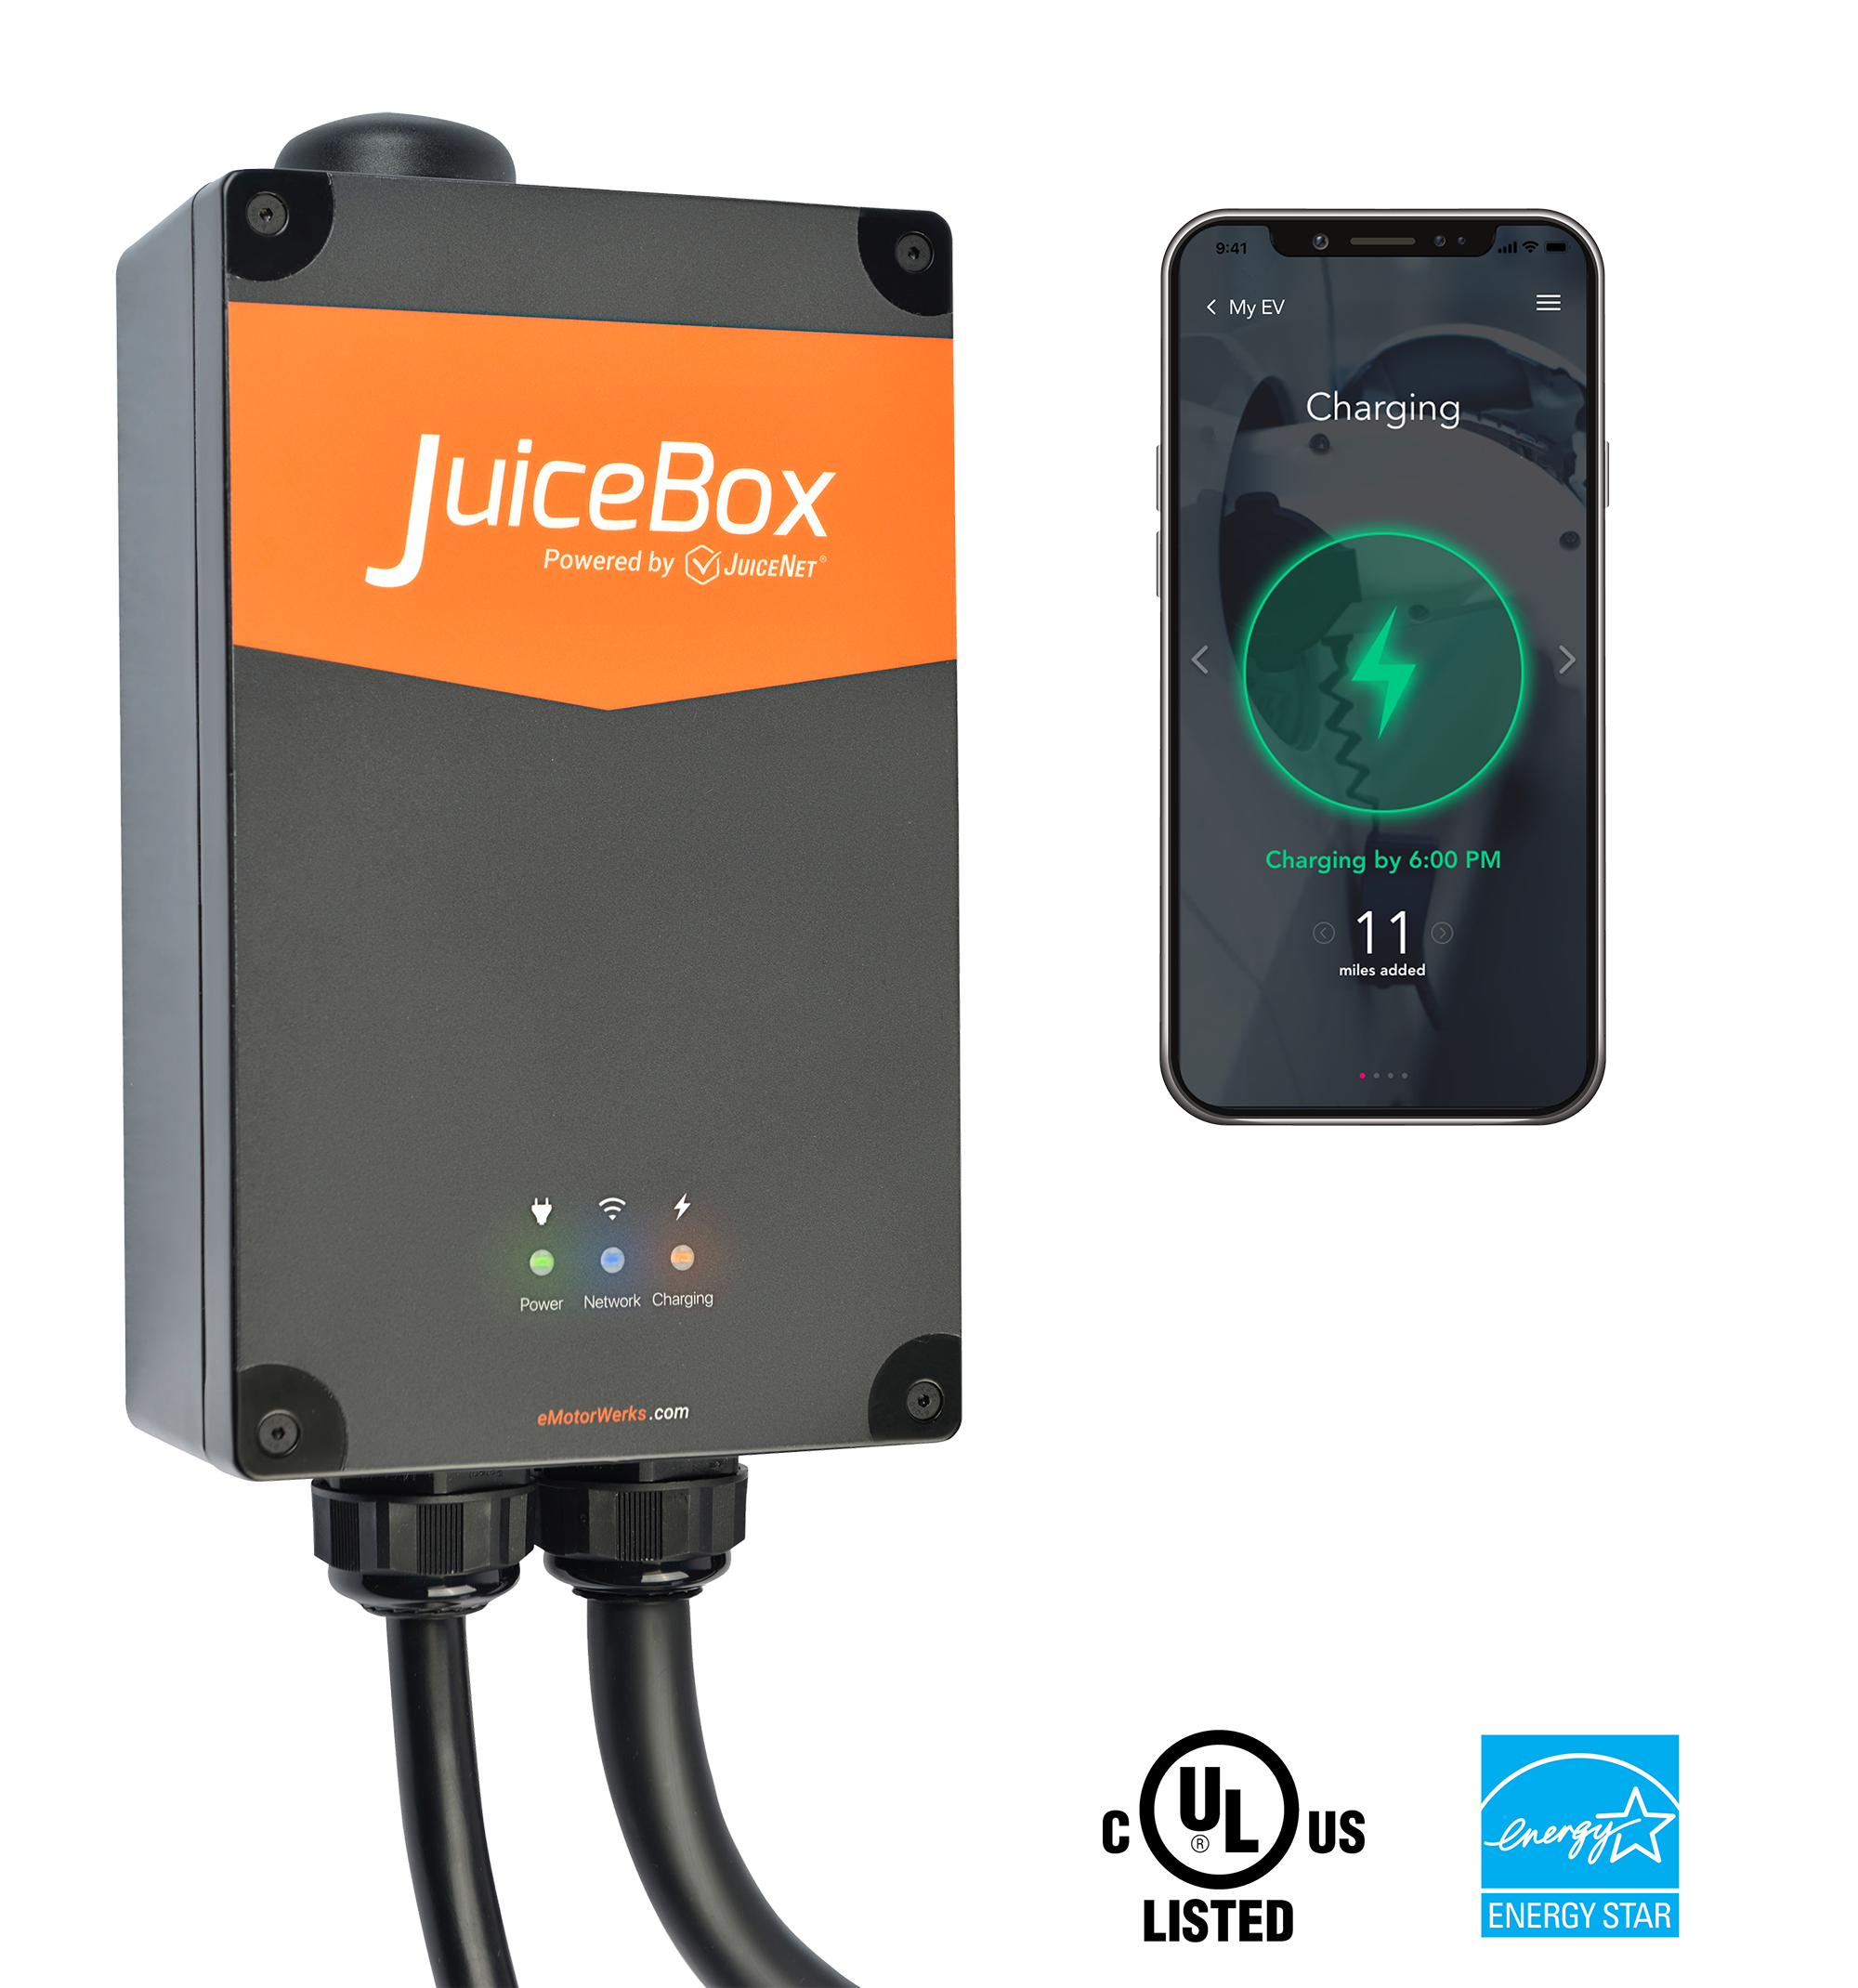 JuiceBox Pro 40 Electric Car Smart Home Charging Station - image 1 of 7